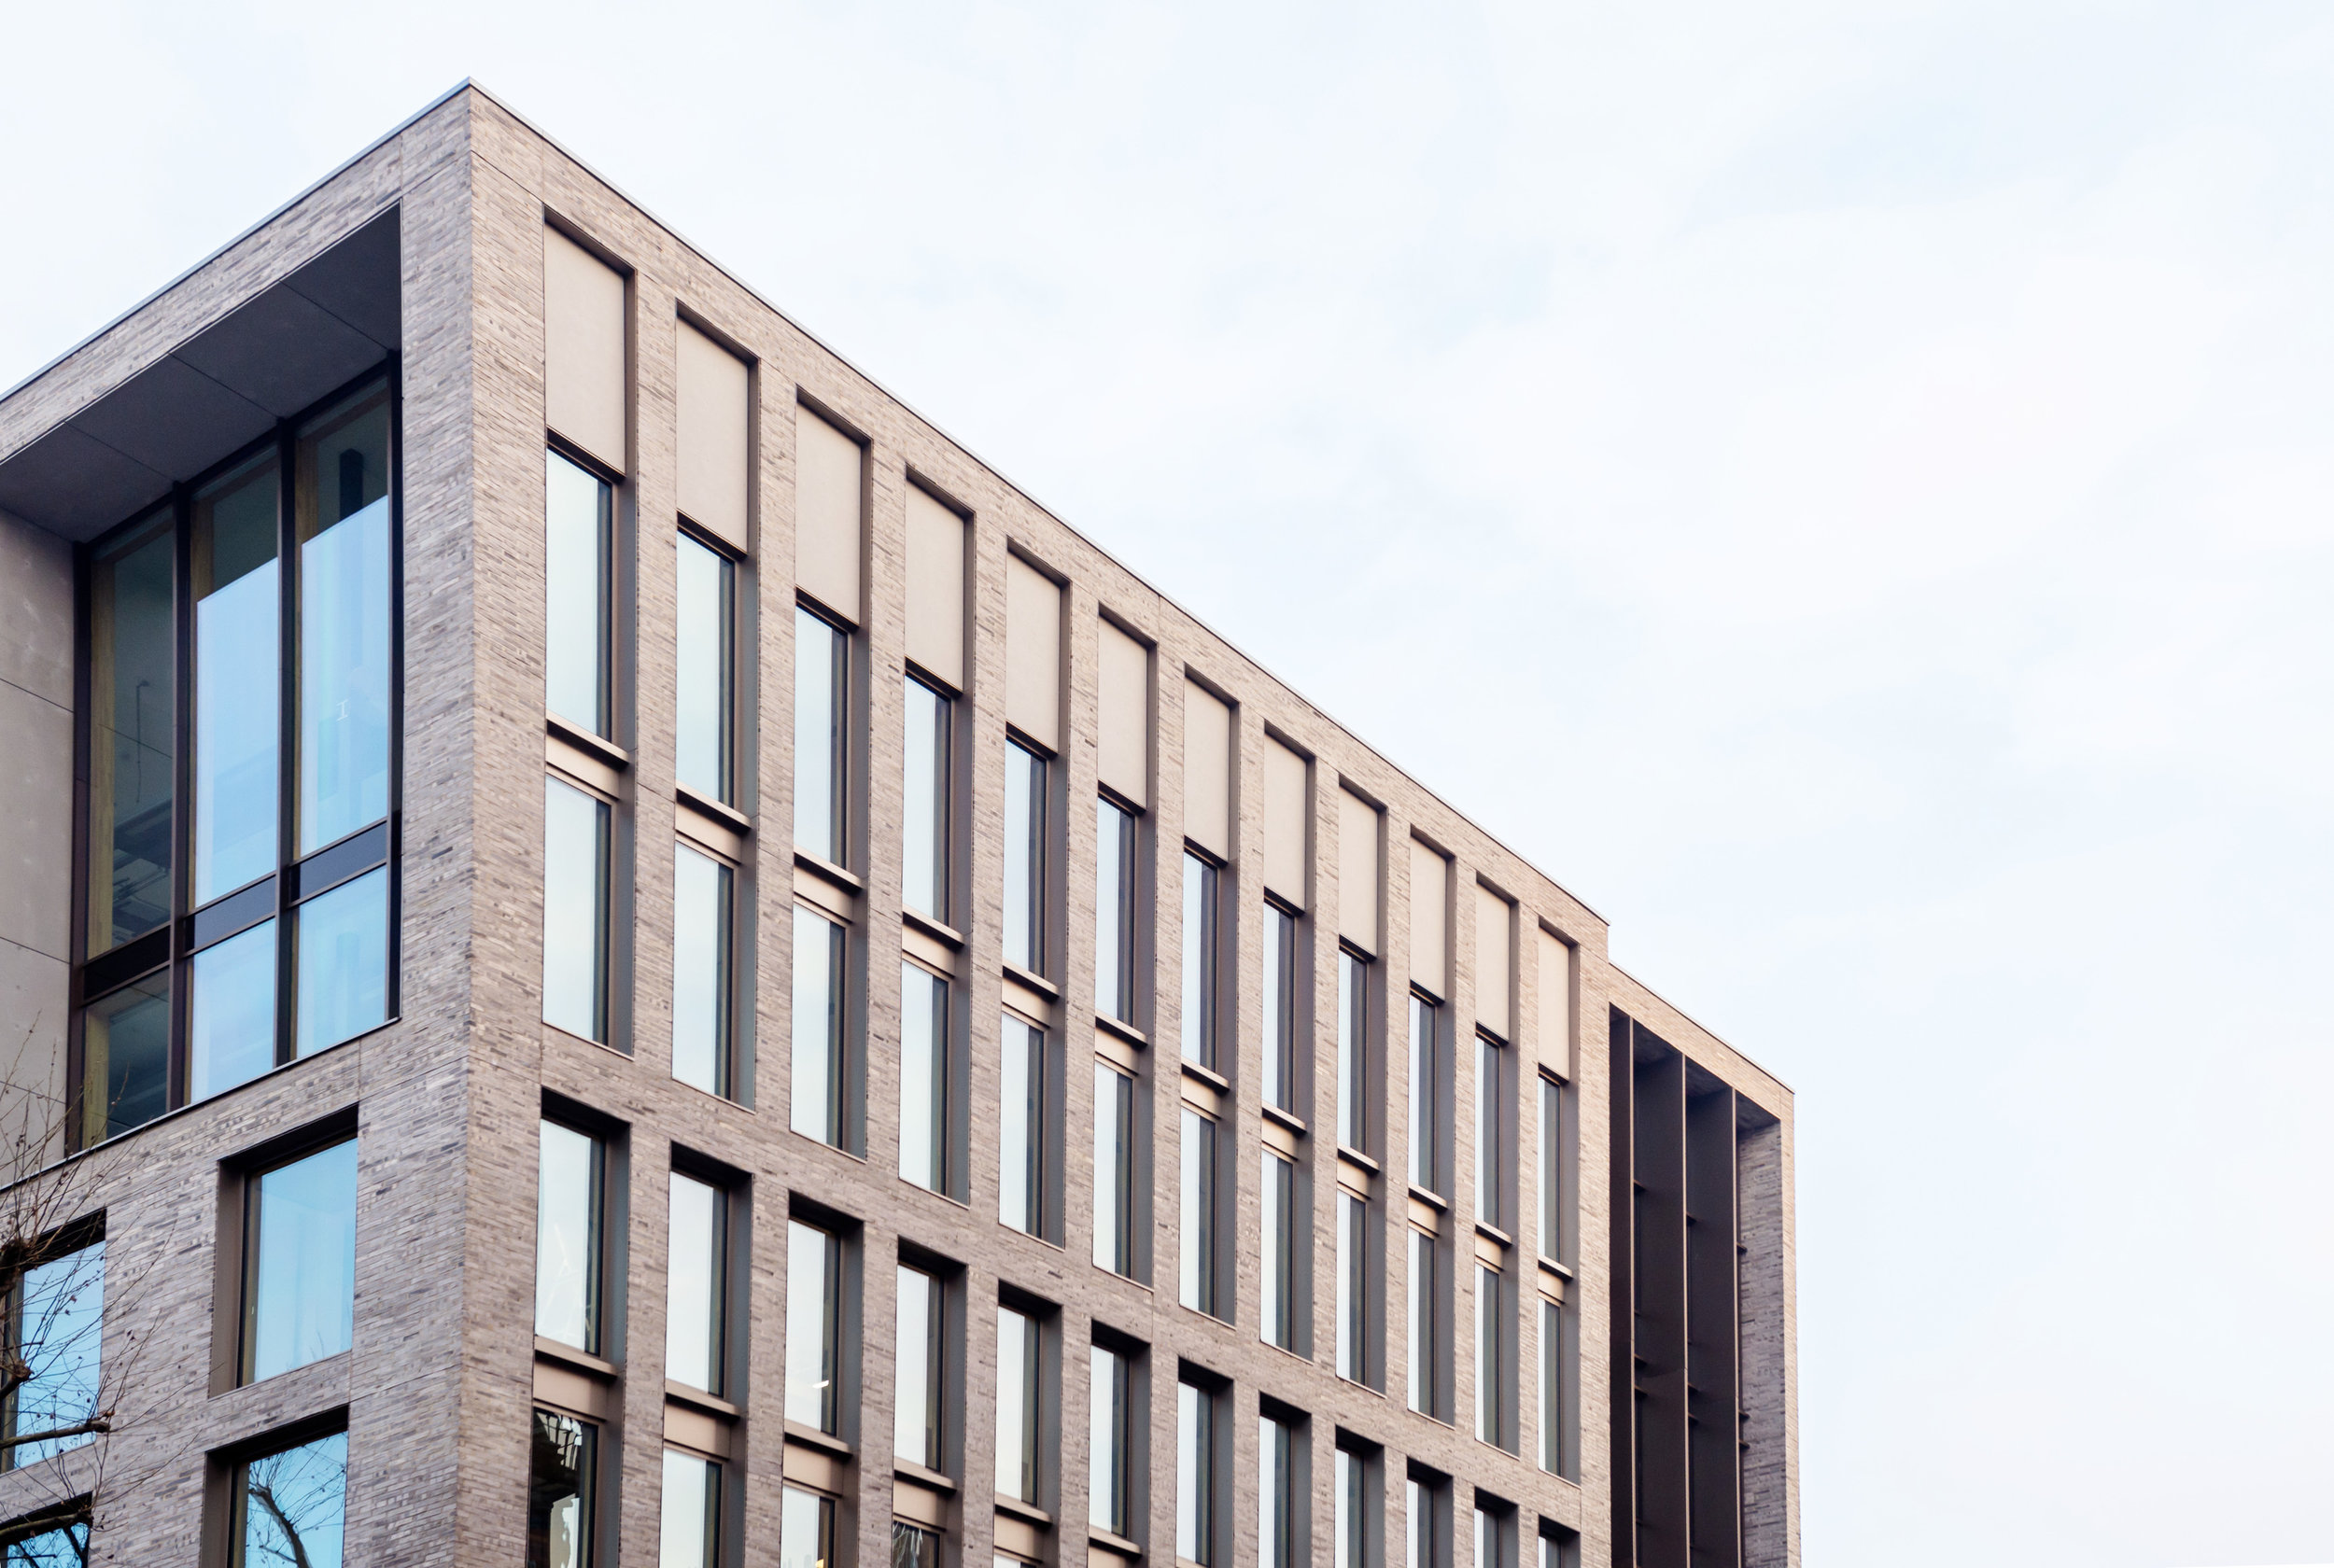  The exterior of the refurbished Bartlett School of Architecture, 22 Gordon Street. London by Hawkins/Brown Architects 